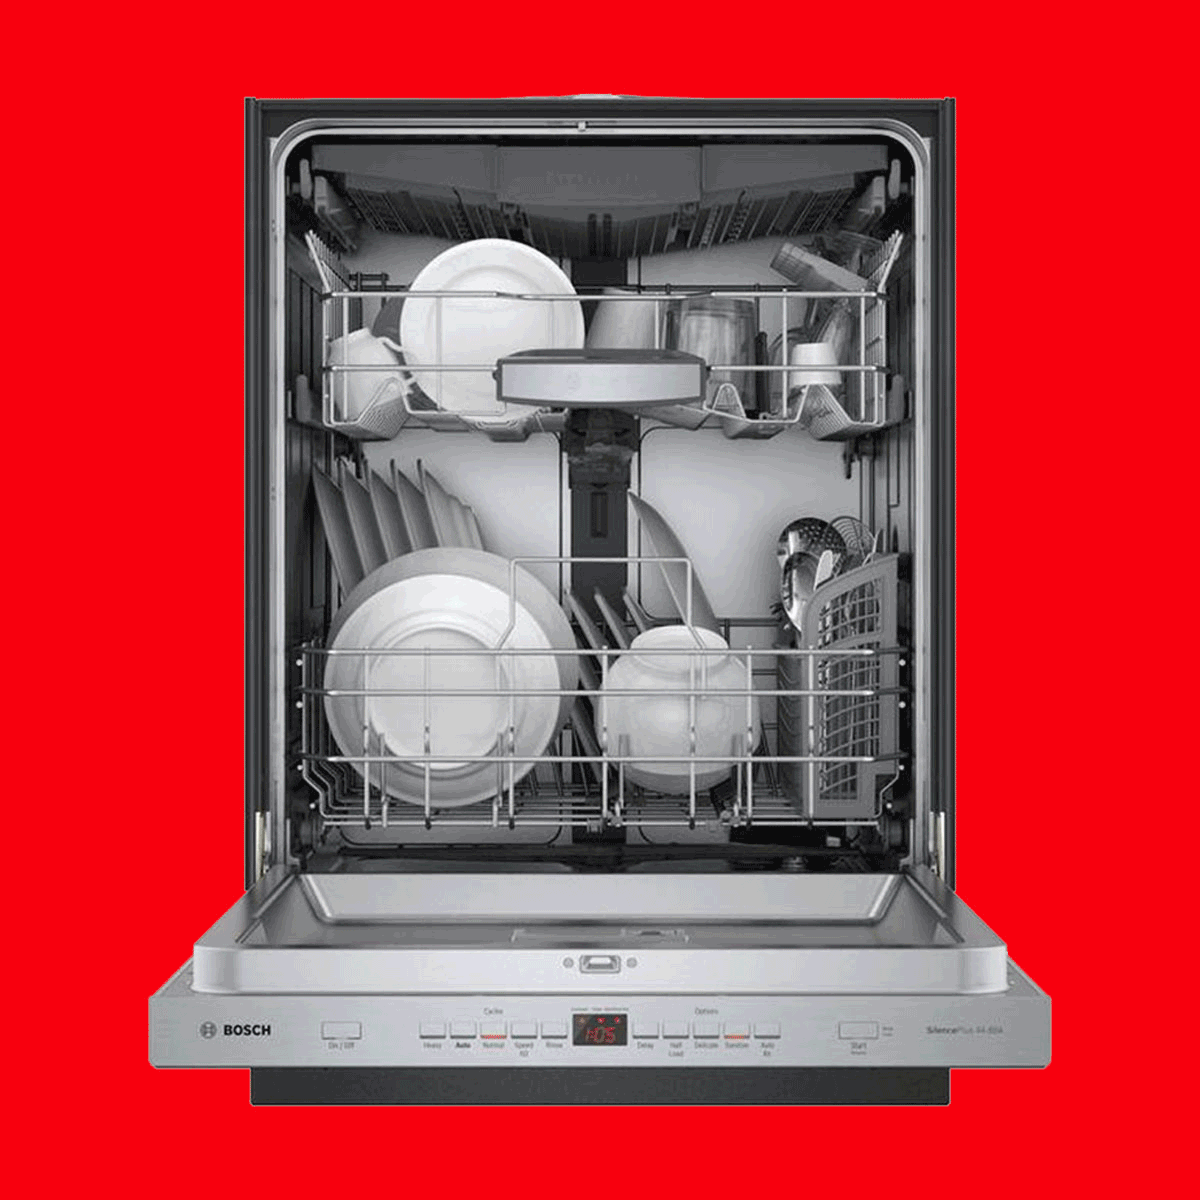 Top Reasons to Buy a High-End Dishwasher